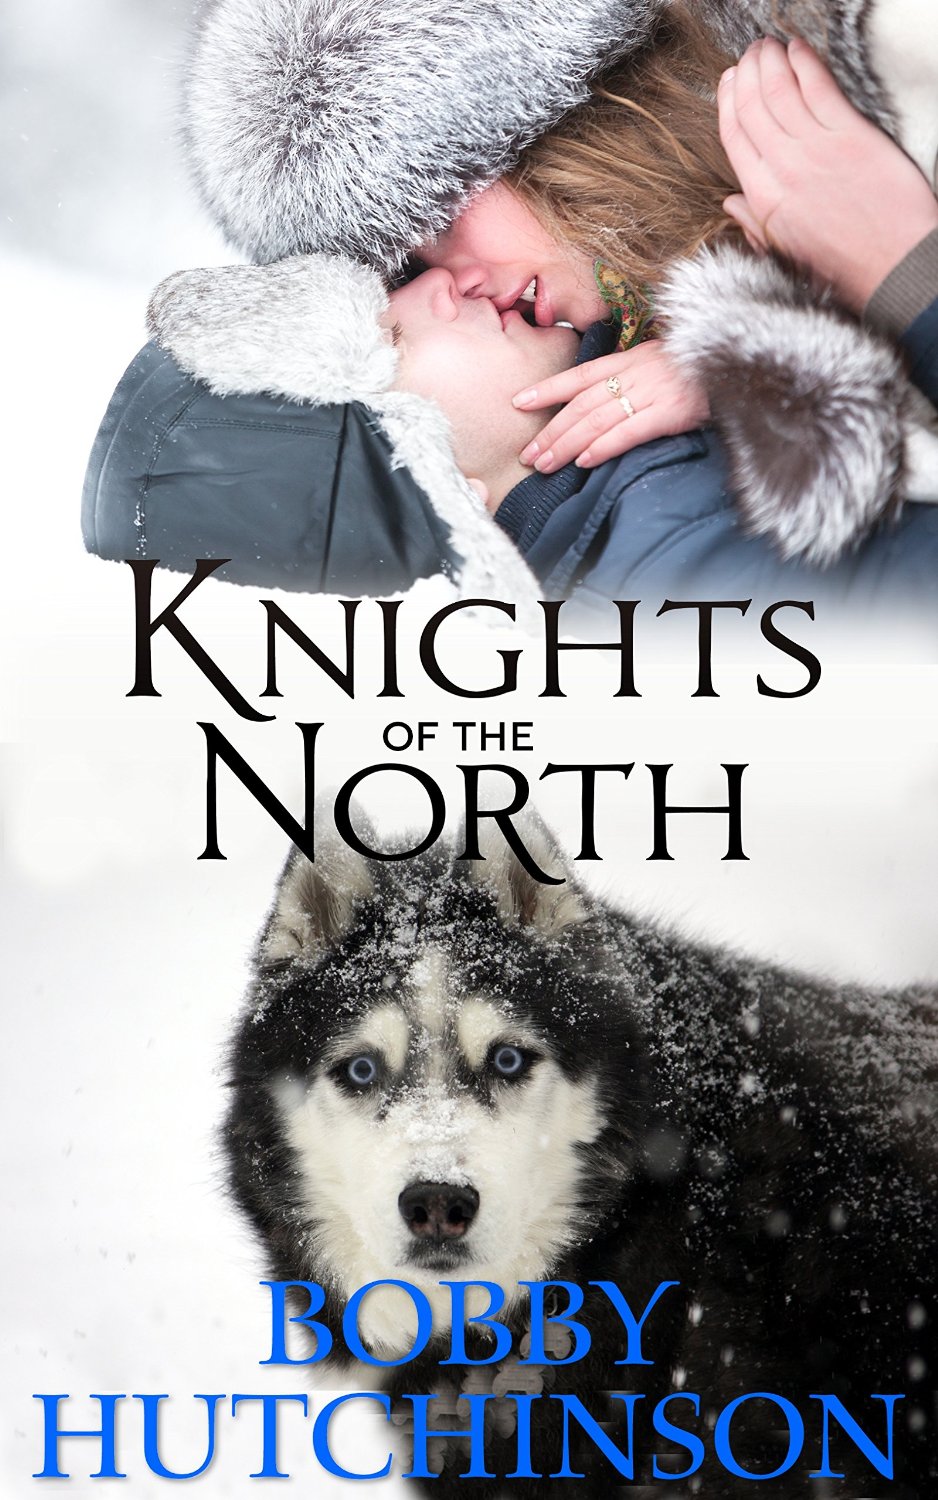 KNIGHTS OF THE NORTH: A YUKON ADVENTURE by Bobby Hutchinson